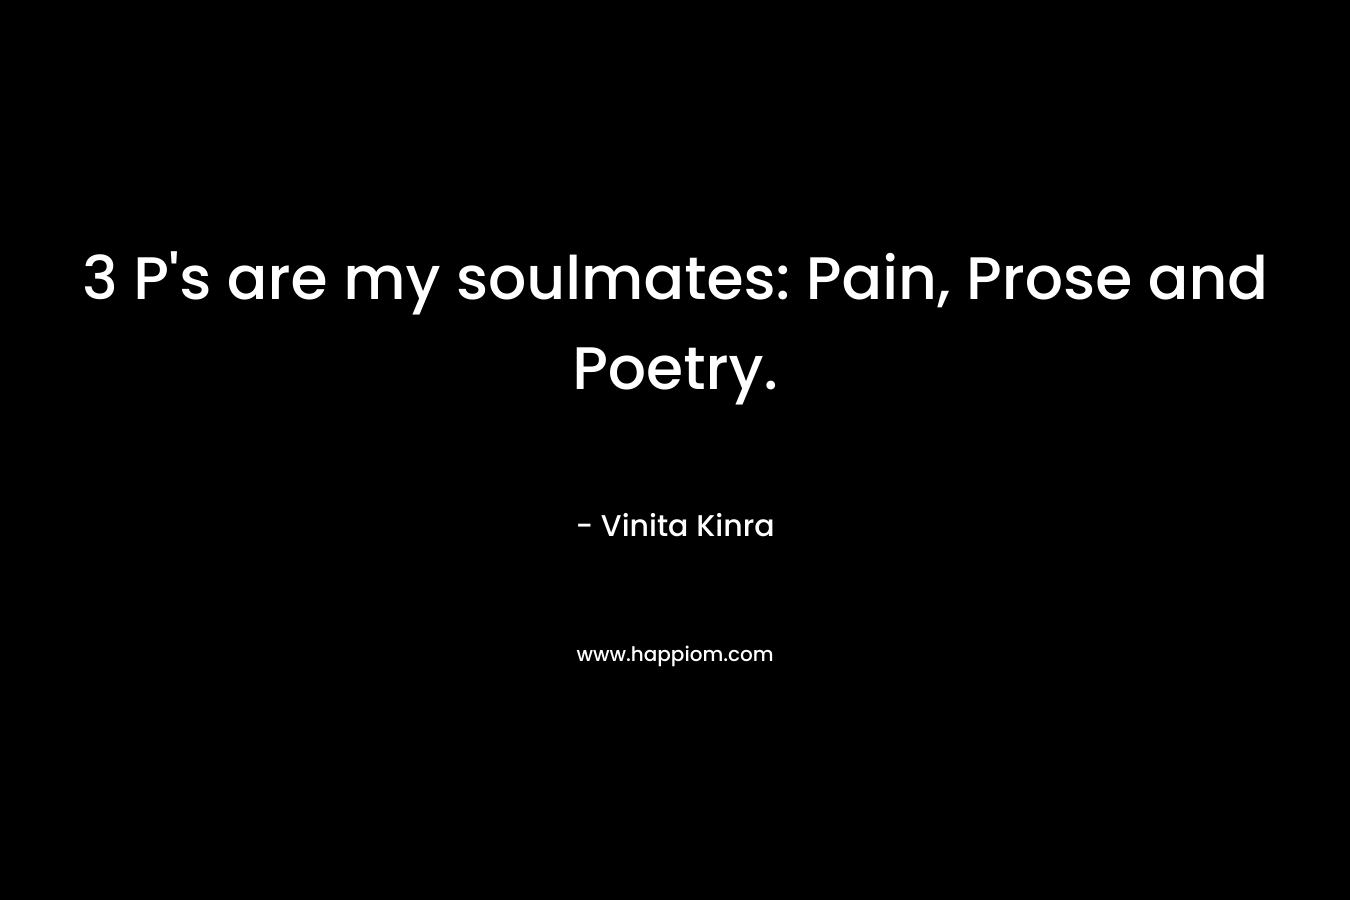 3 P’s are my soulmates: Pain, Prose and Poetry. – Vinita Kinra